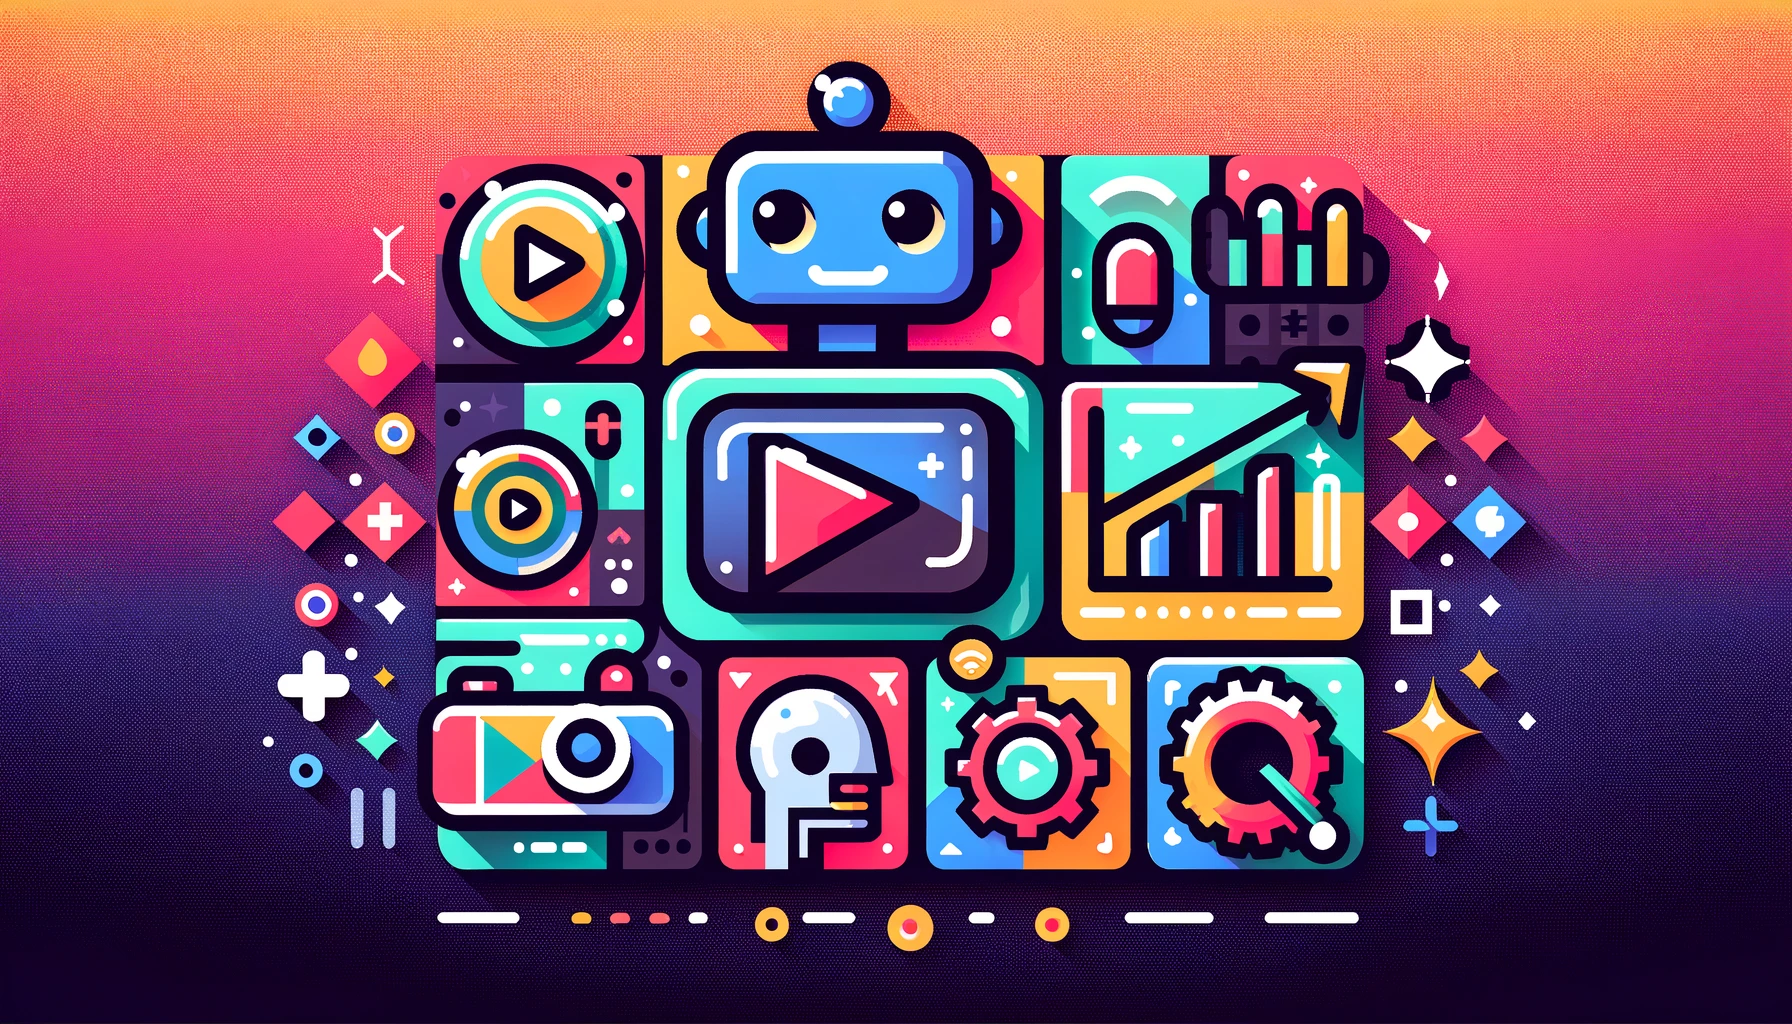 best ai tools for youtube